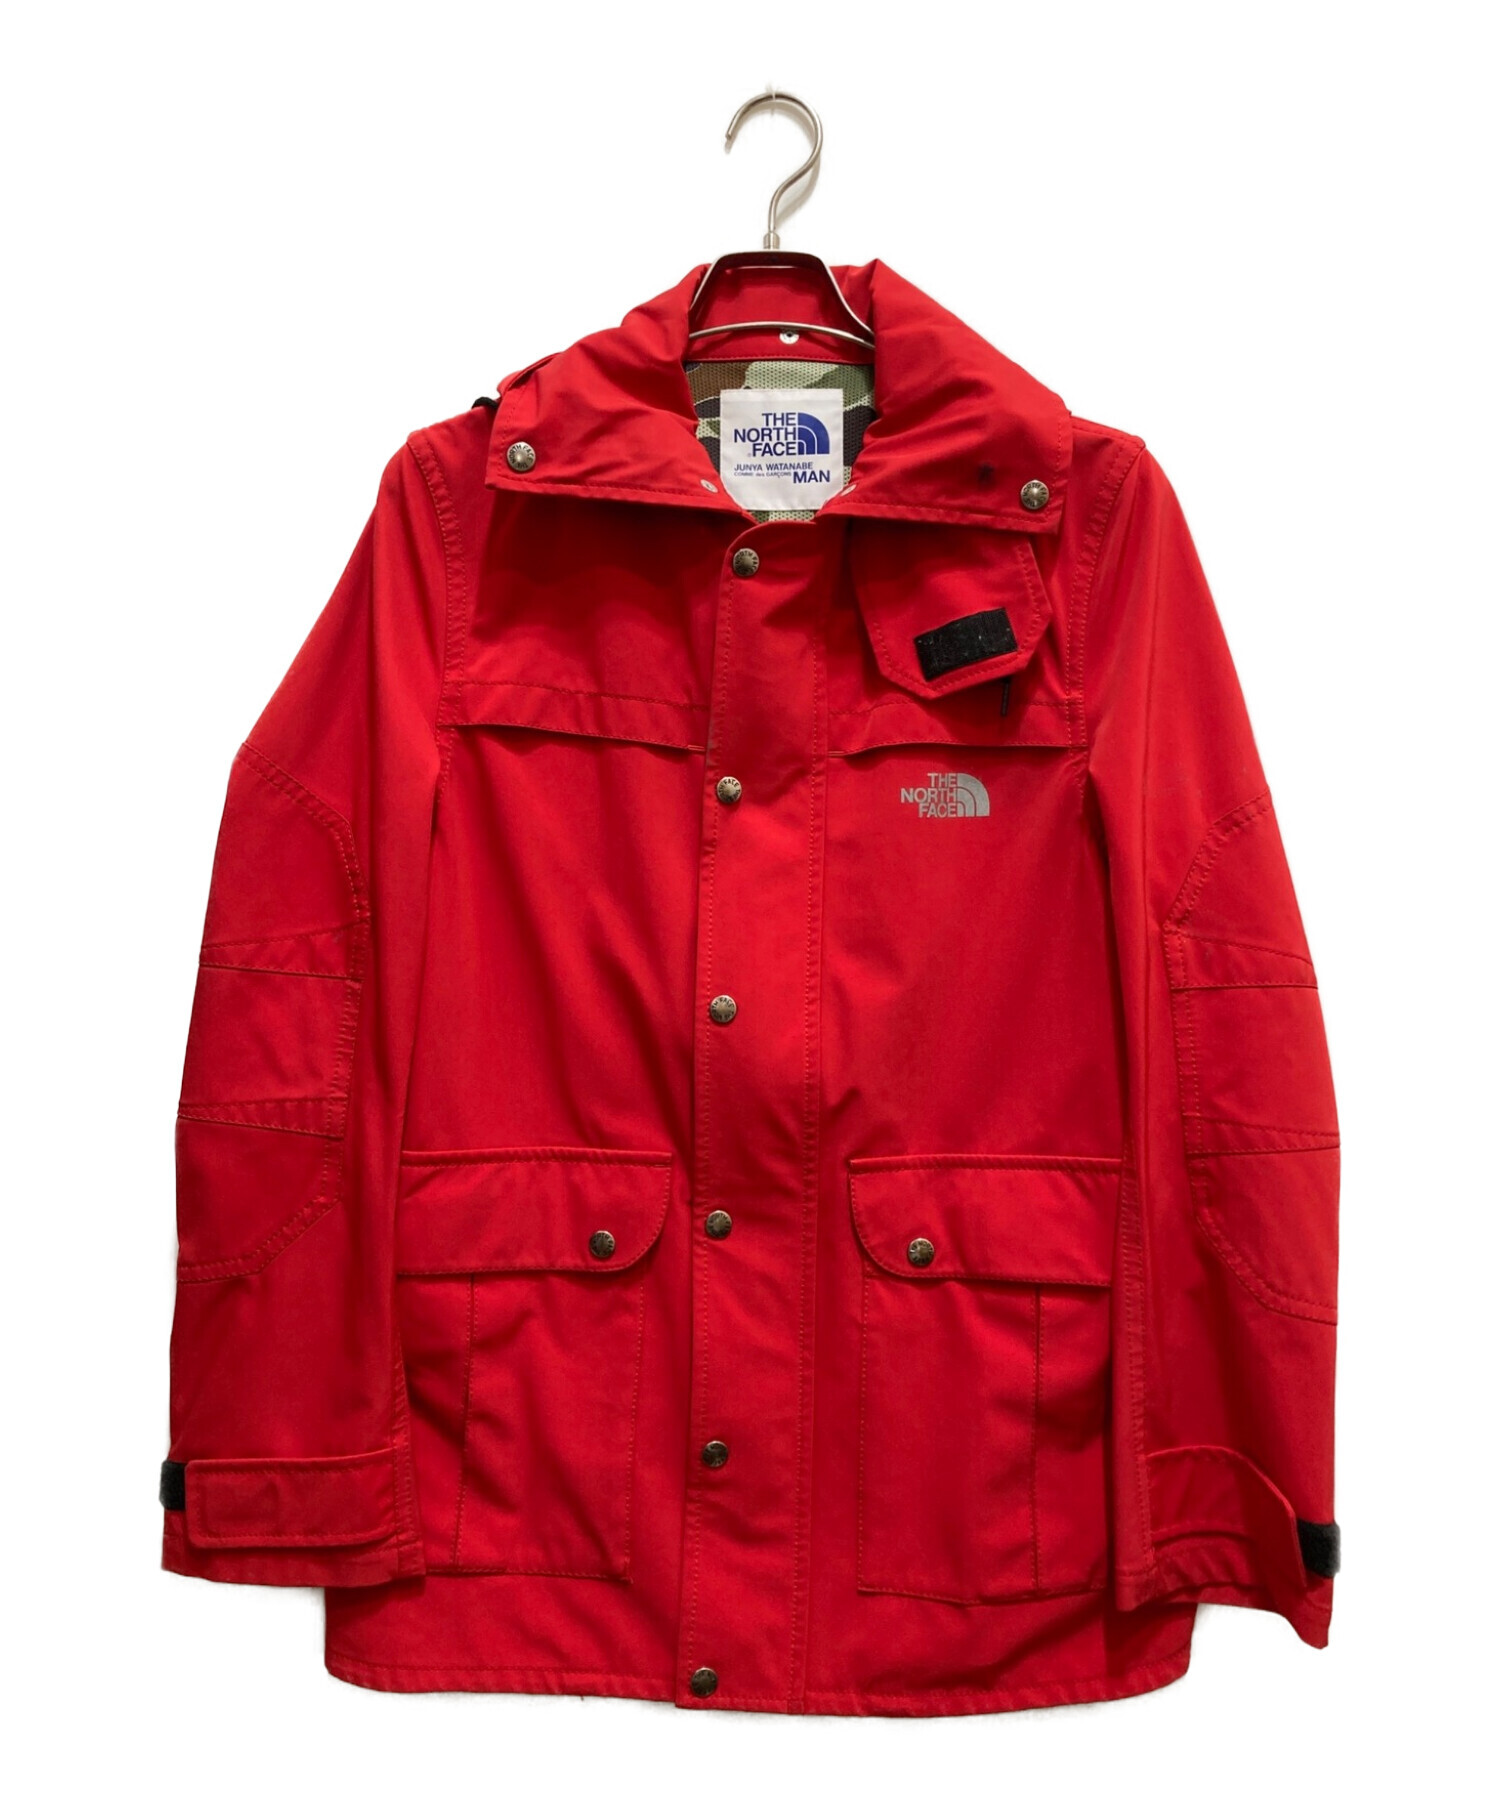 junyawatanabe comme des garcons マウンテパーカーUNDE